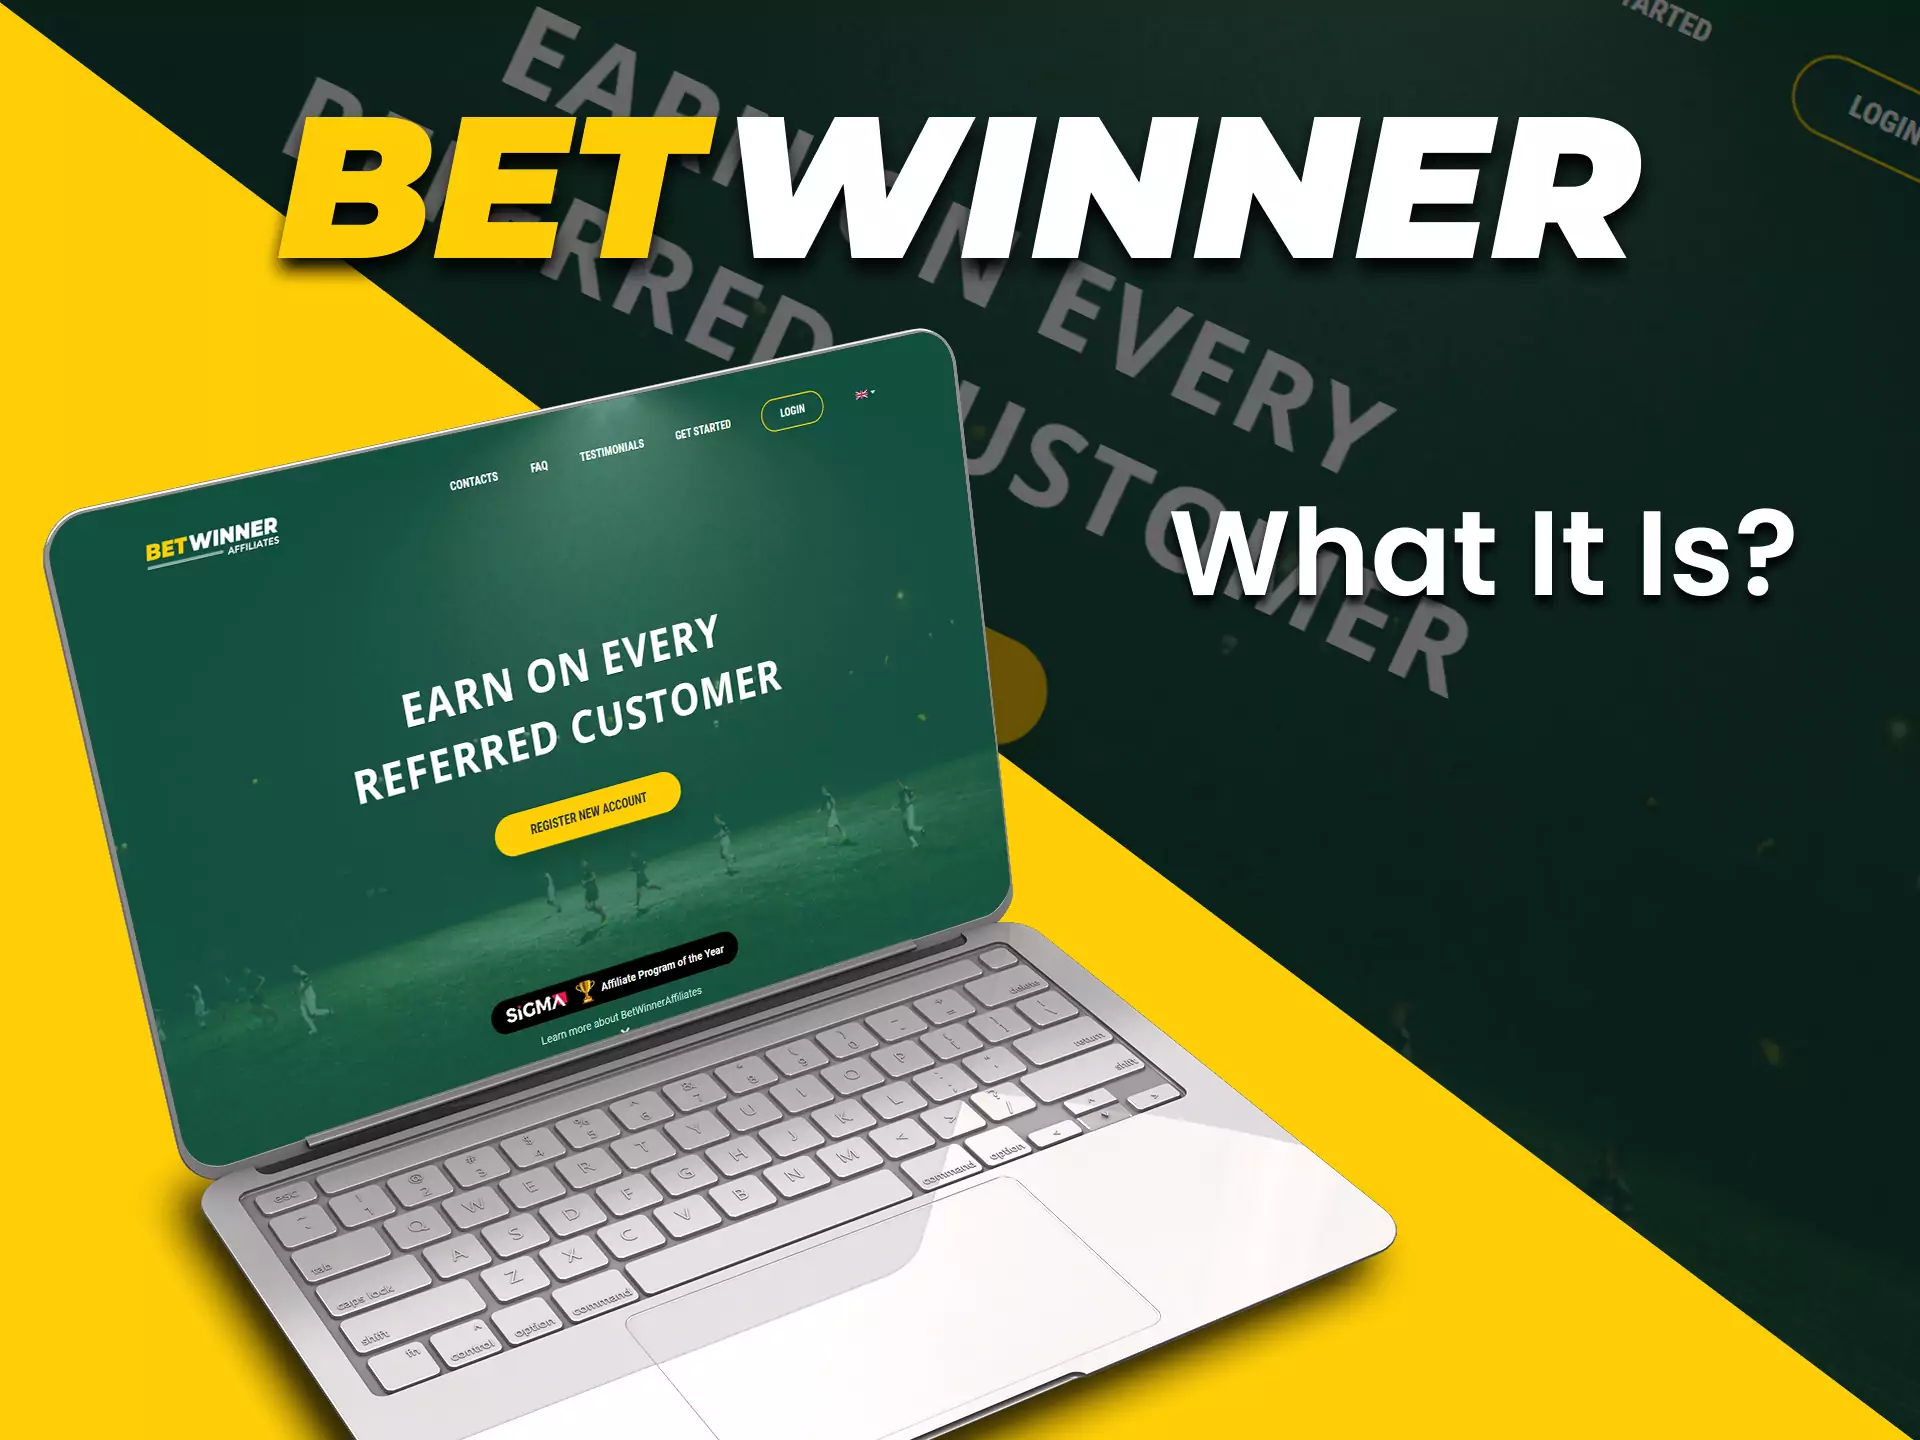 Betwinner Paraguay Reviewed: What Can One Learn From Other's Mistakes